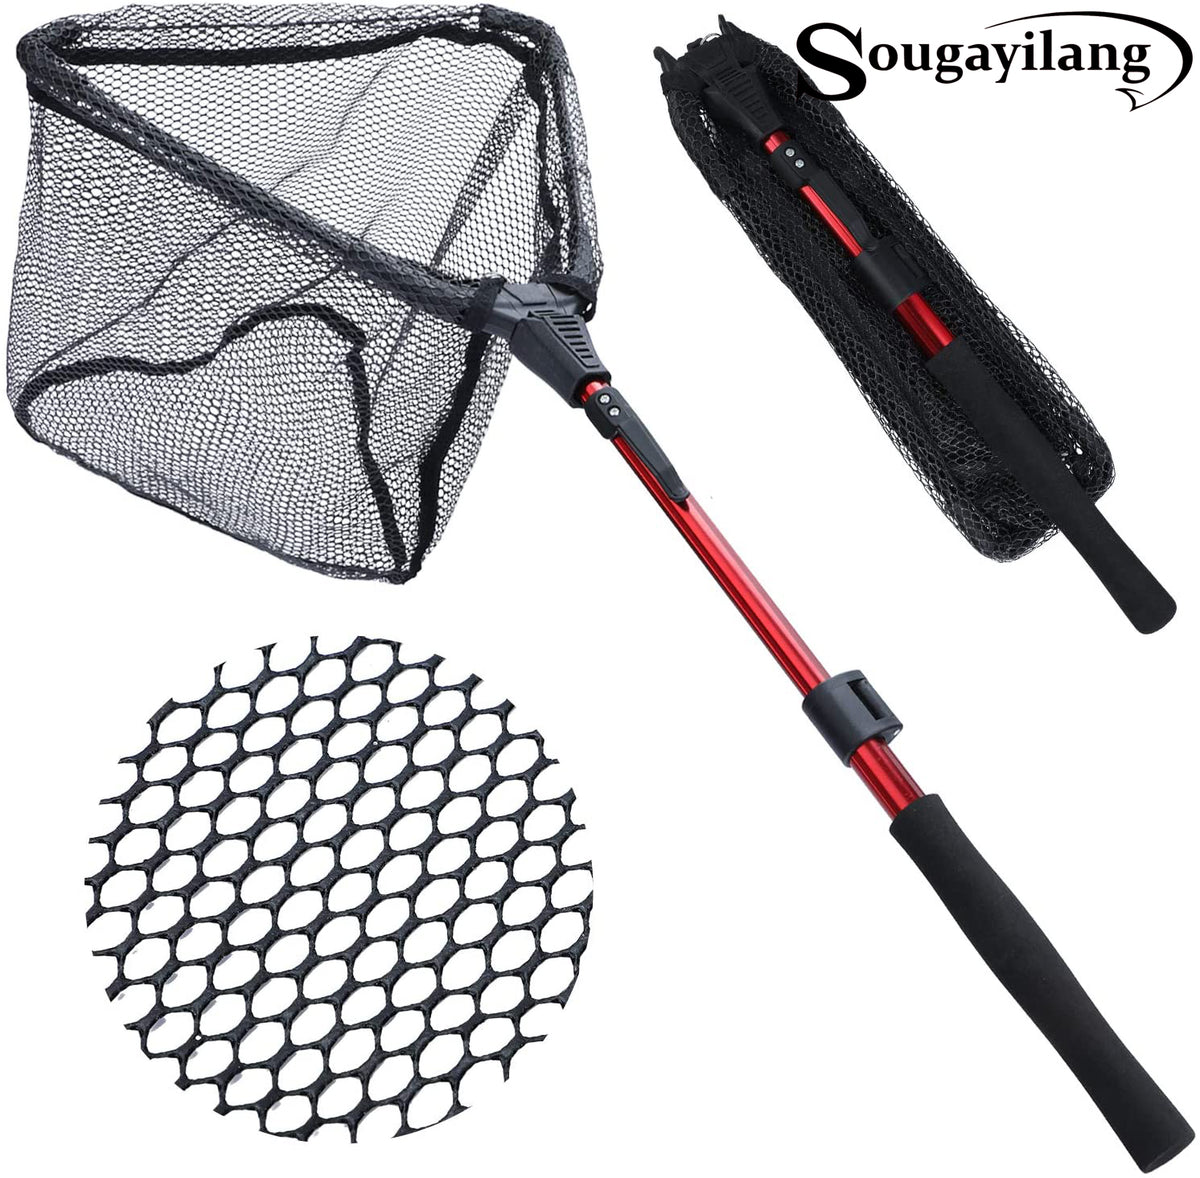 MAYNOS Folding Fishing Net-Foldable Fish Landing Net Robust Aluminum  Telescopic Pole Handle and Safe Fish Catching or Releasing for Durable and  Nylon Mesh 